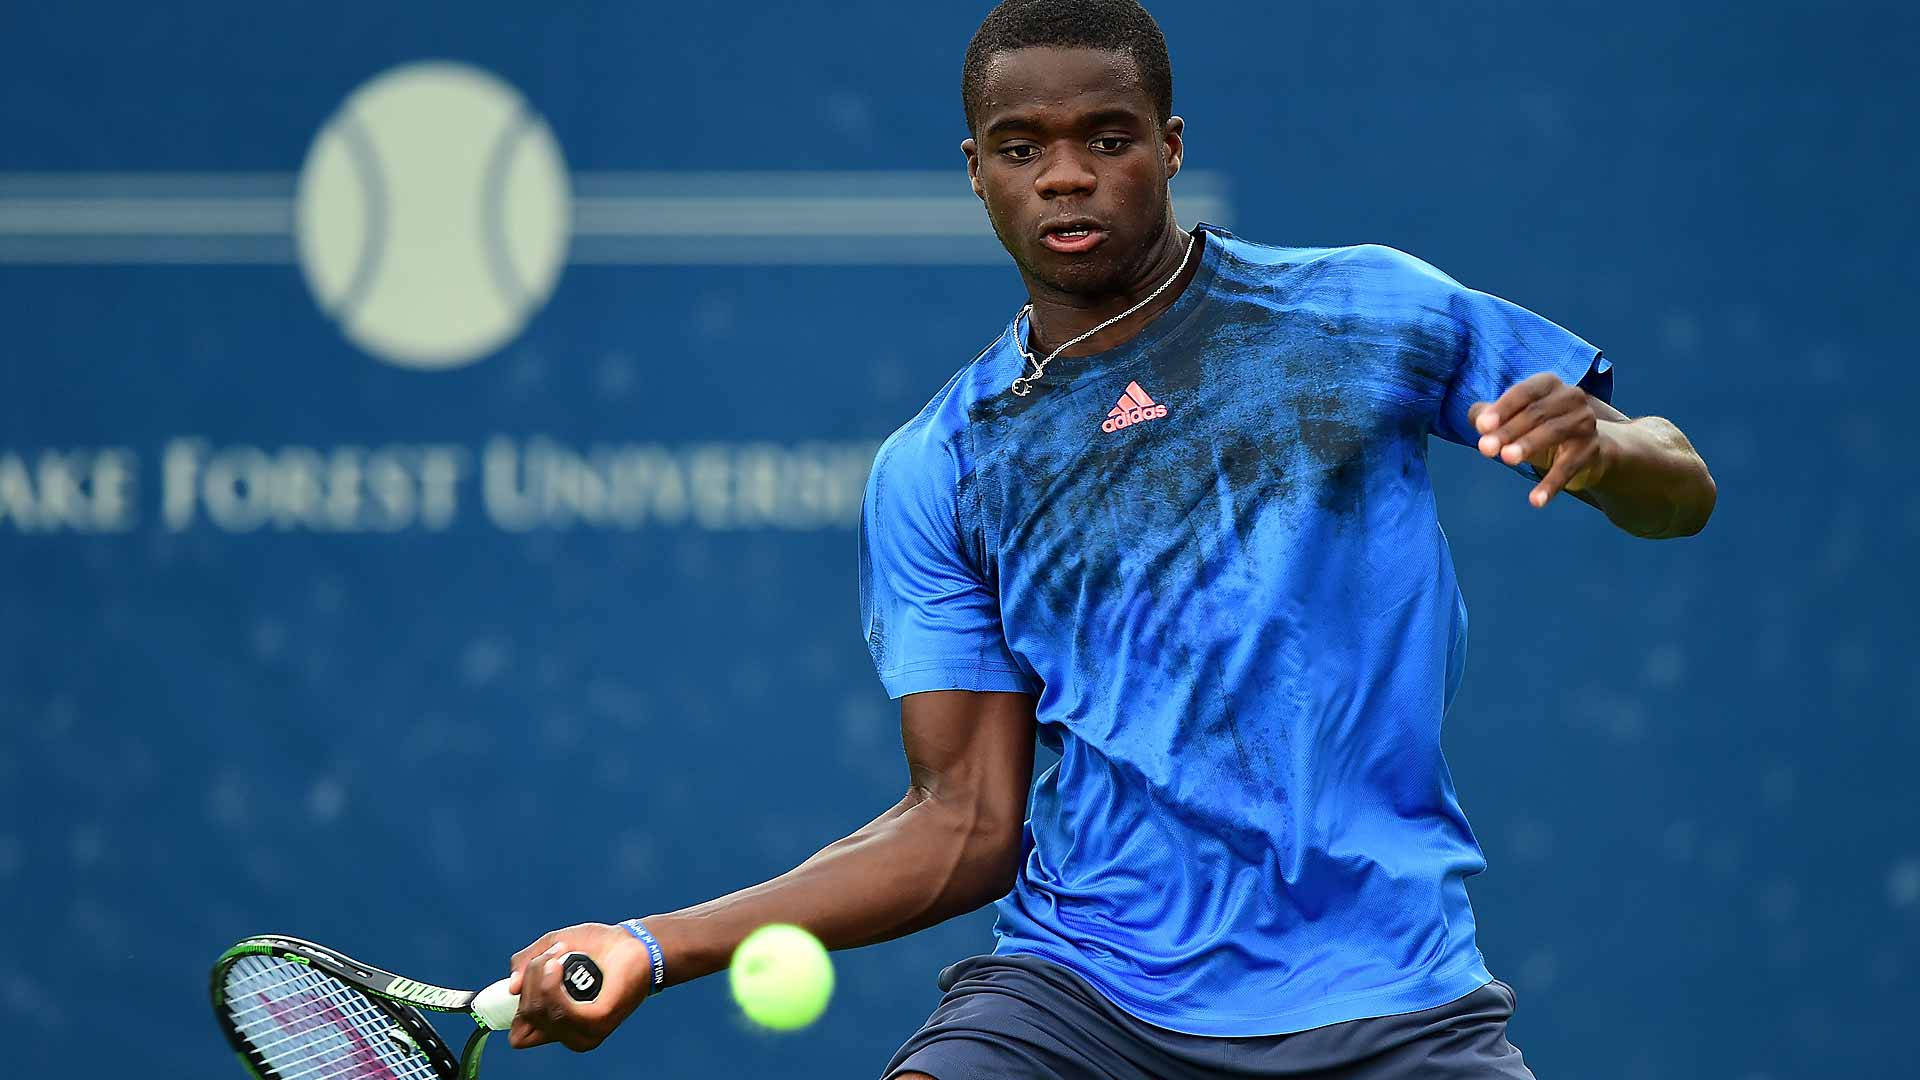 Forehandvolley Frances Tiafoe Would Be Translated To 